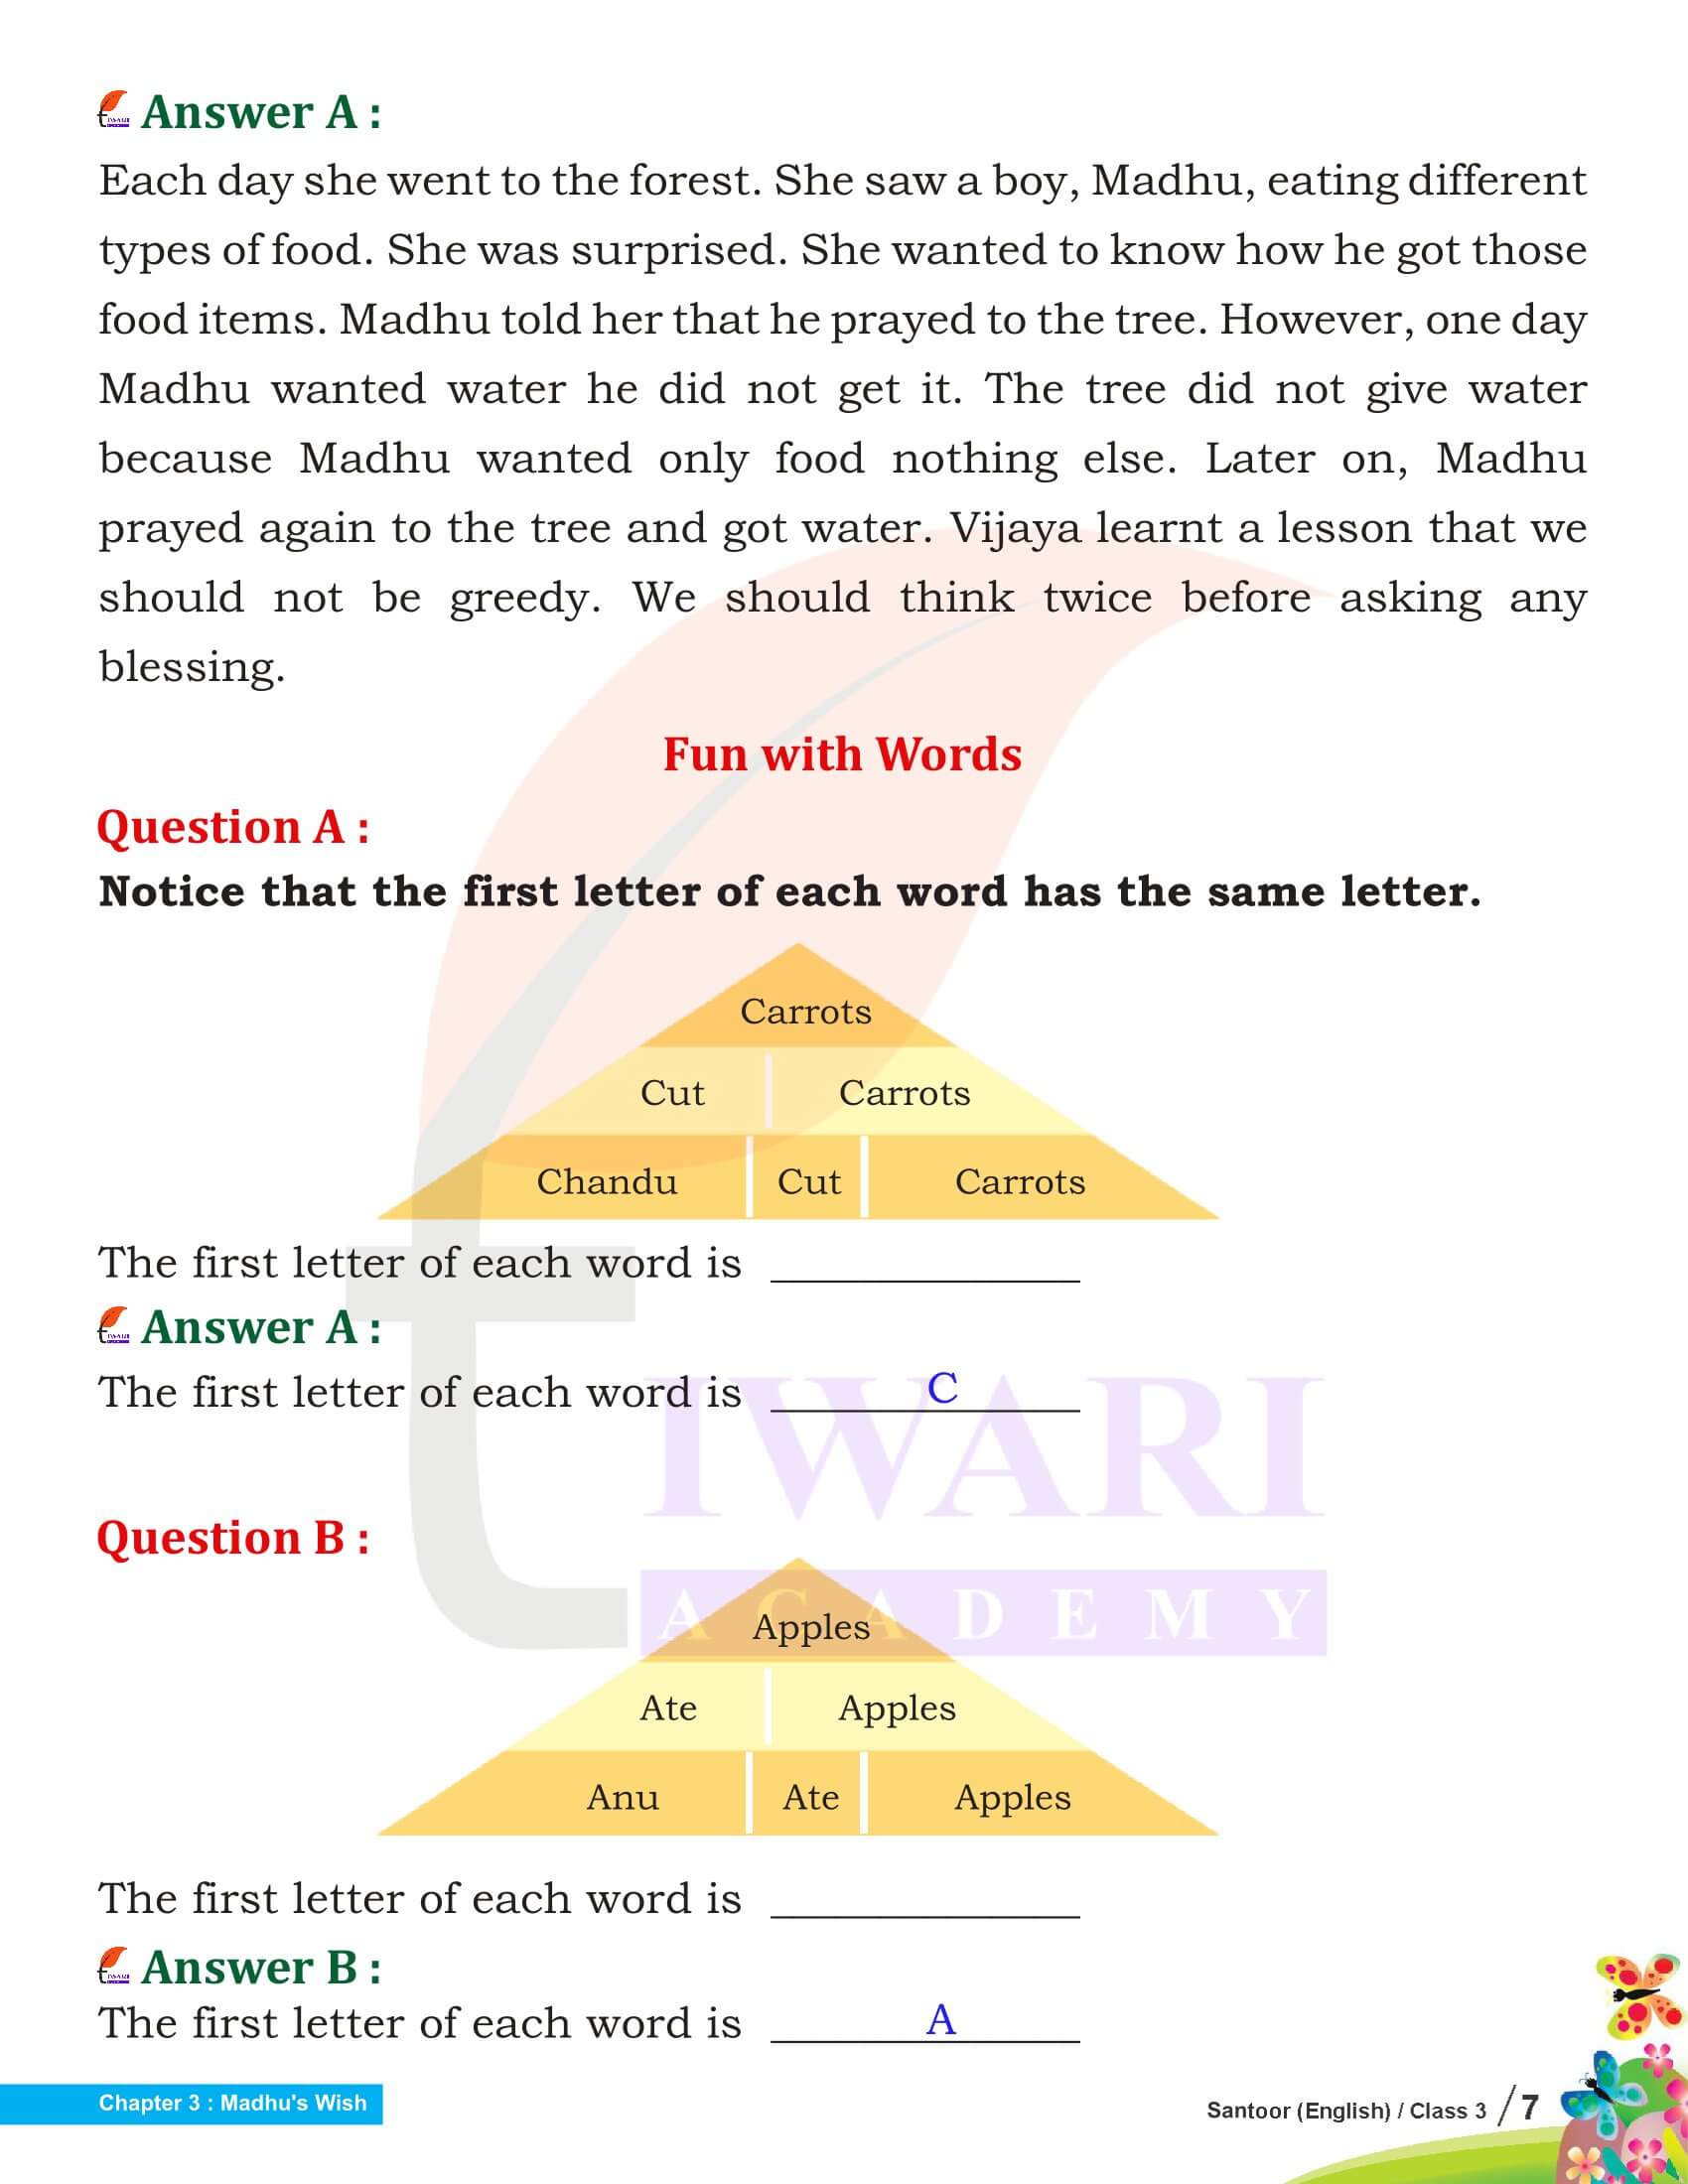 Class 3 English Santoor Chapter 9 Answers of exercises